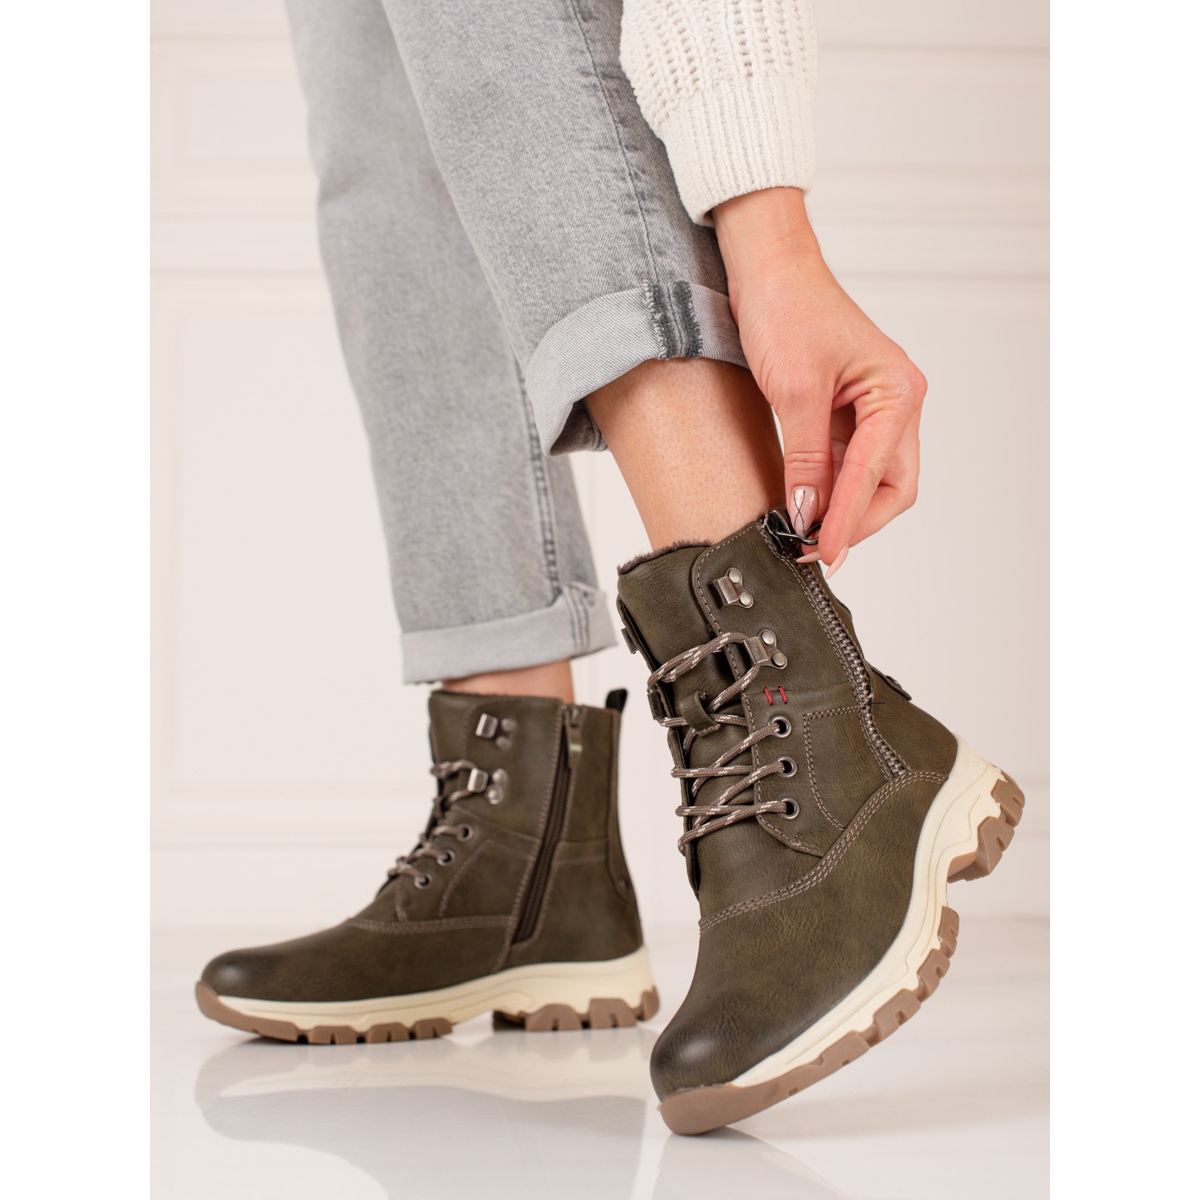 SHELOVET lace-up trappers | eBay